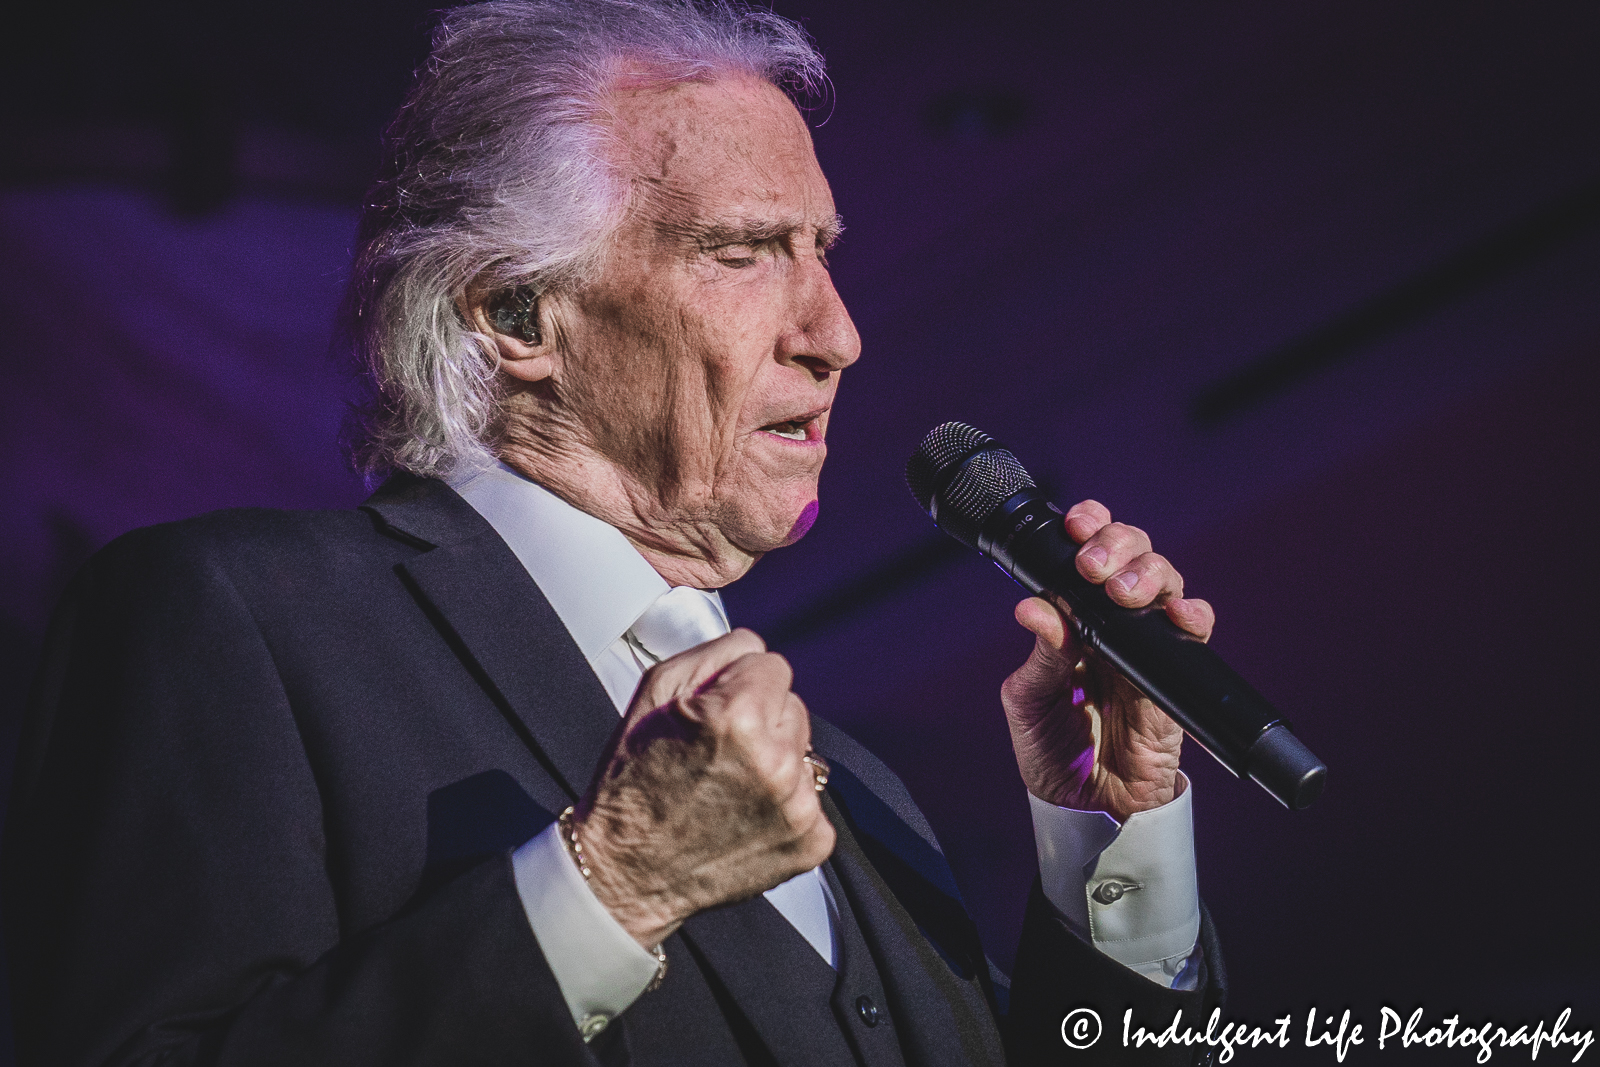 The Righteous Brothers founding member Bill Medley belting out a note at Prairie Band Casino in Mayetta, KS on June 29, 2023.